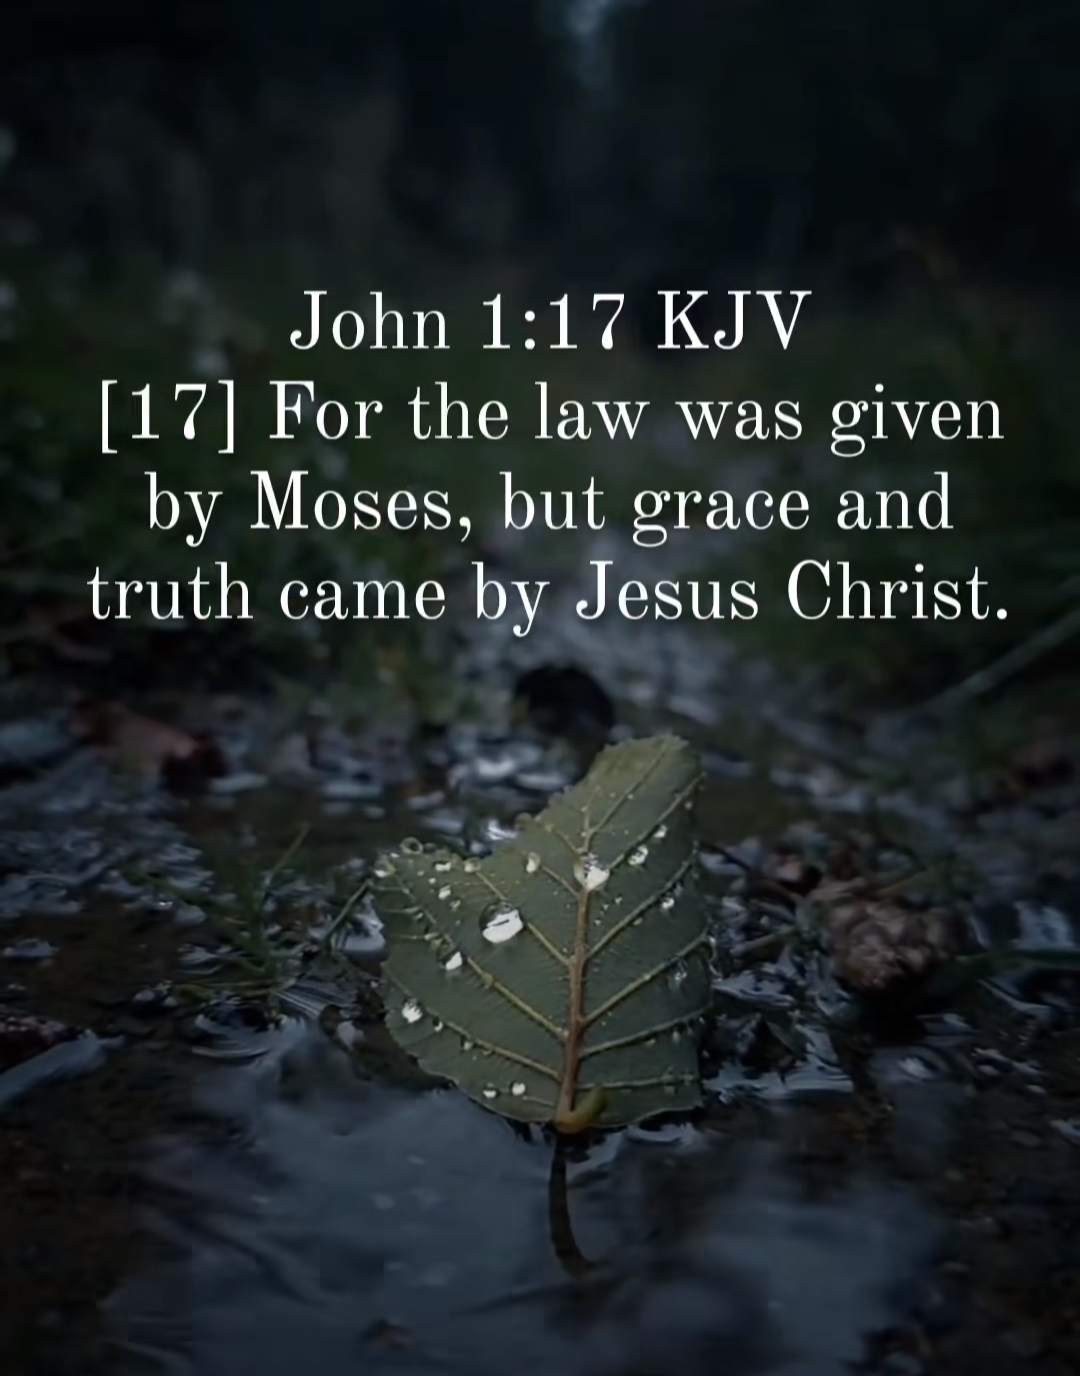 White text placed over water droplet covered leaf, John 1:17 KJV For the law was given by Moses, but grace and truth came by Jesus Christ.